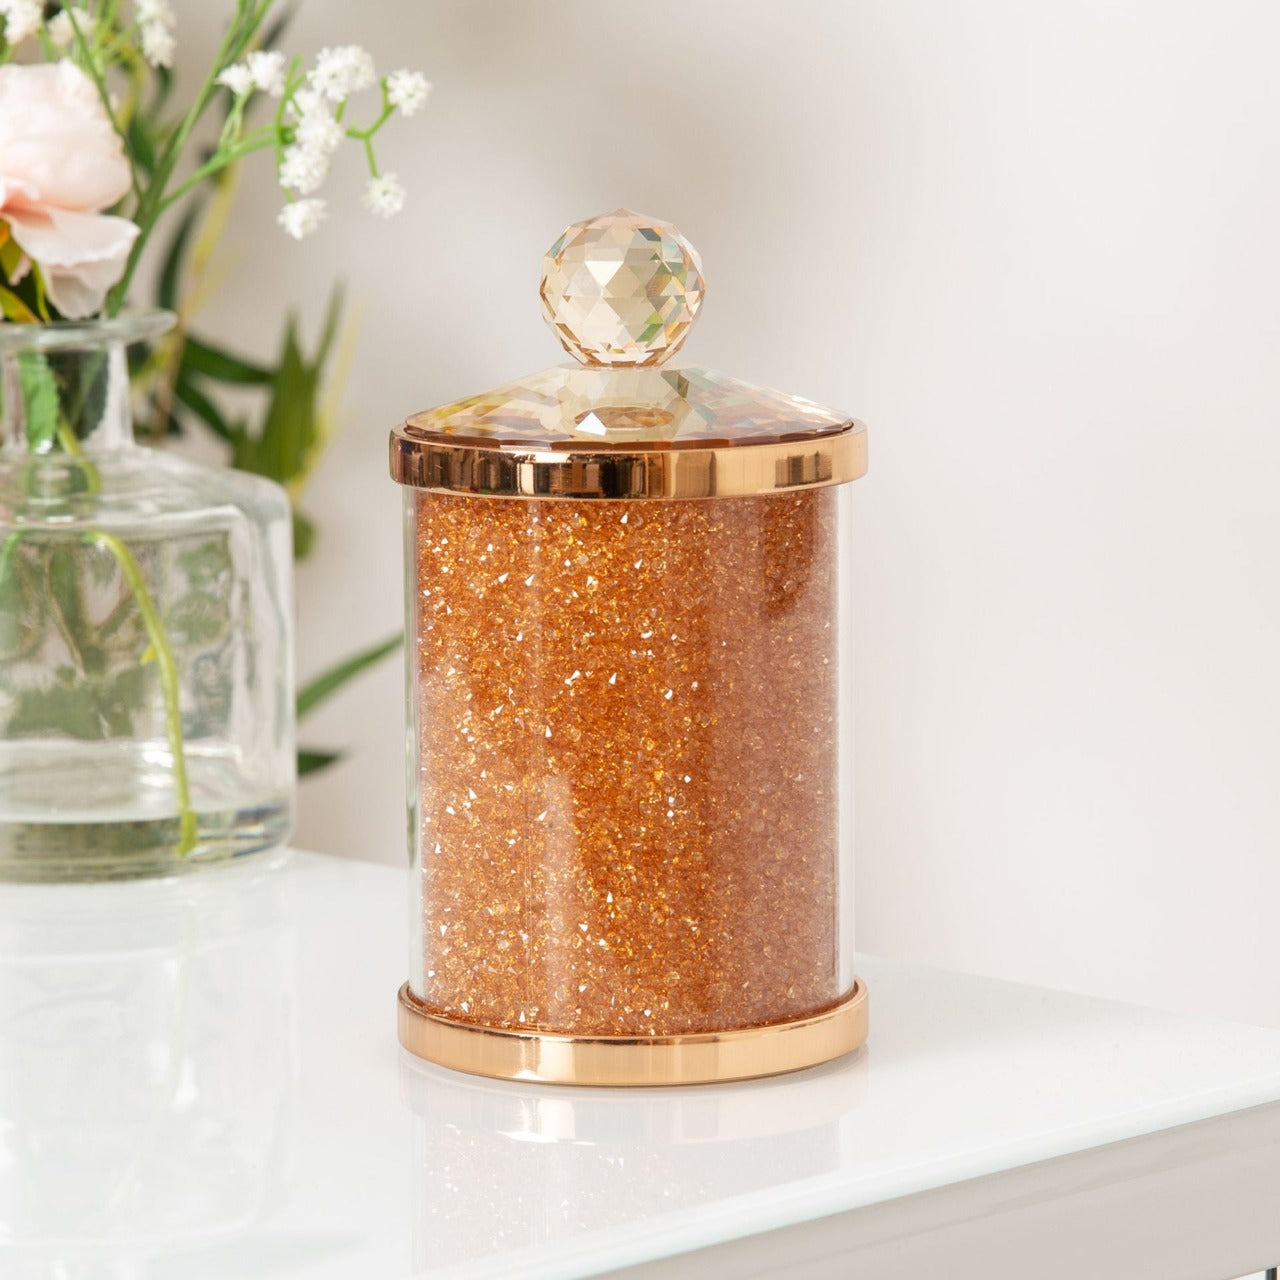 Estella Rose Gold Glass & Crystal Trinket Box  Store those bits and bobs, jewellery or keepsakes in style with this rose gold metal, champagne glass and amber crystal trinket box. From Estella by SOPHIA® - Champagne Chic women's home and gift evoking the luxurious spirit of the art deco era.